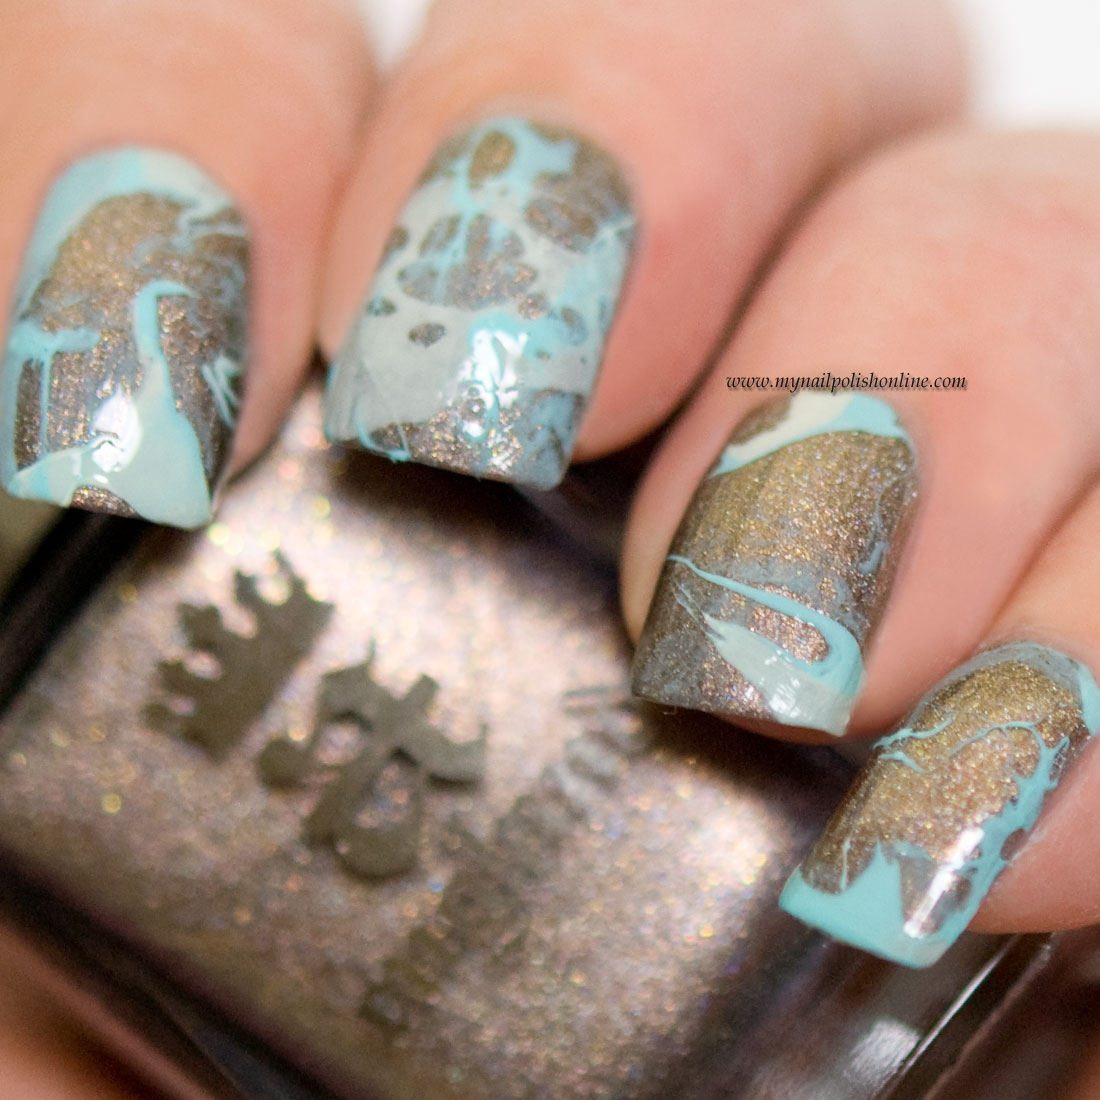 Nail Art - Water Spotted